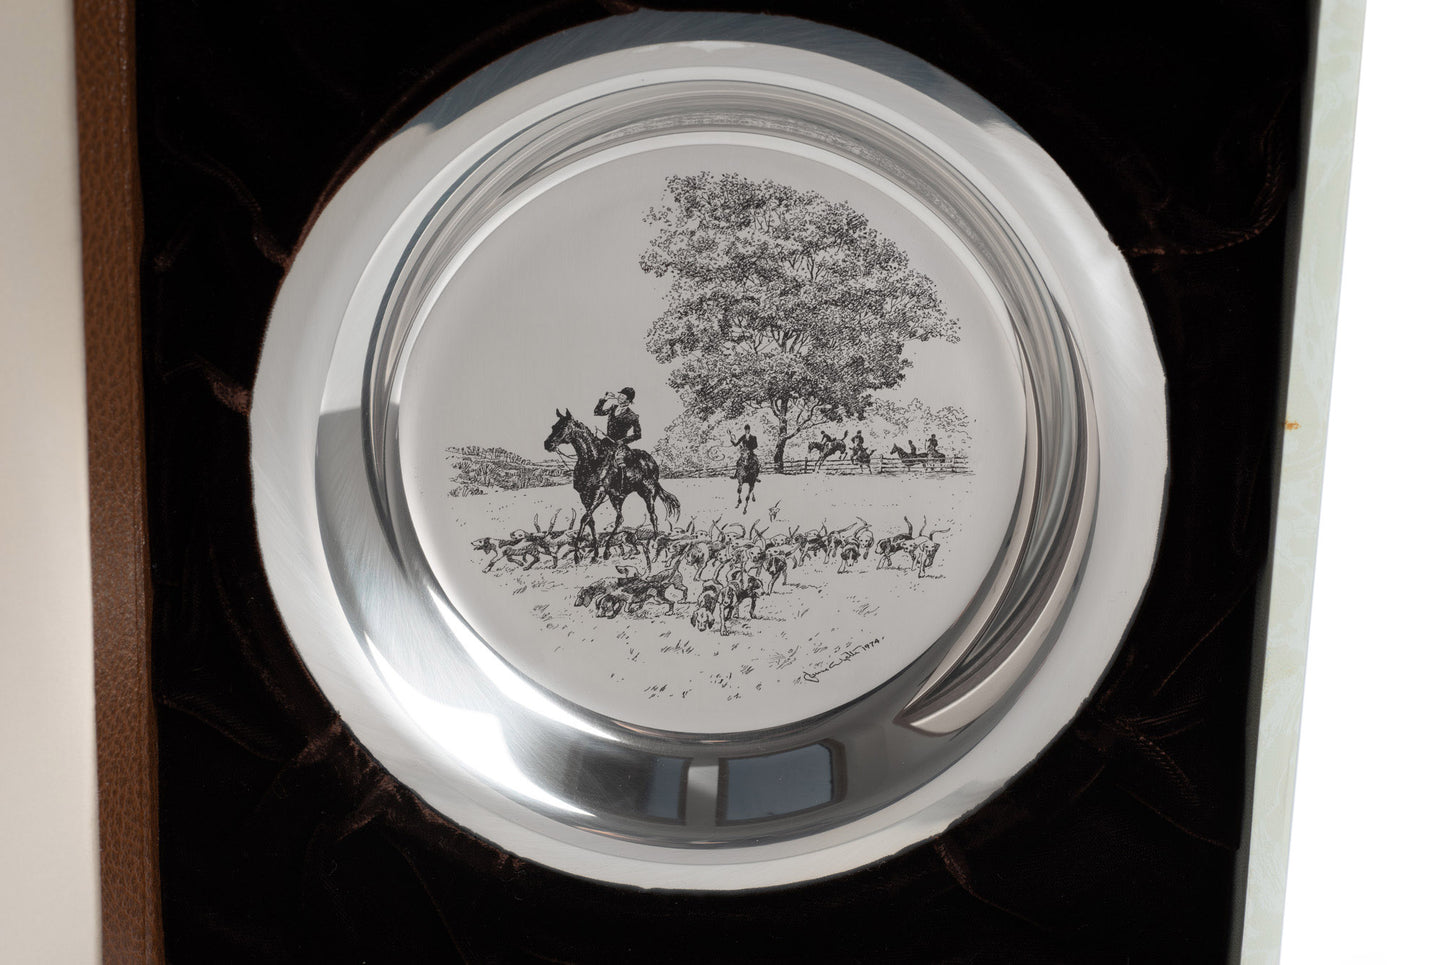 Vintage Sterling Silver Engraved Plate by James Wyeth - Riding the Hunt 1974 (2409)